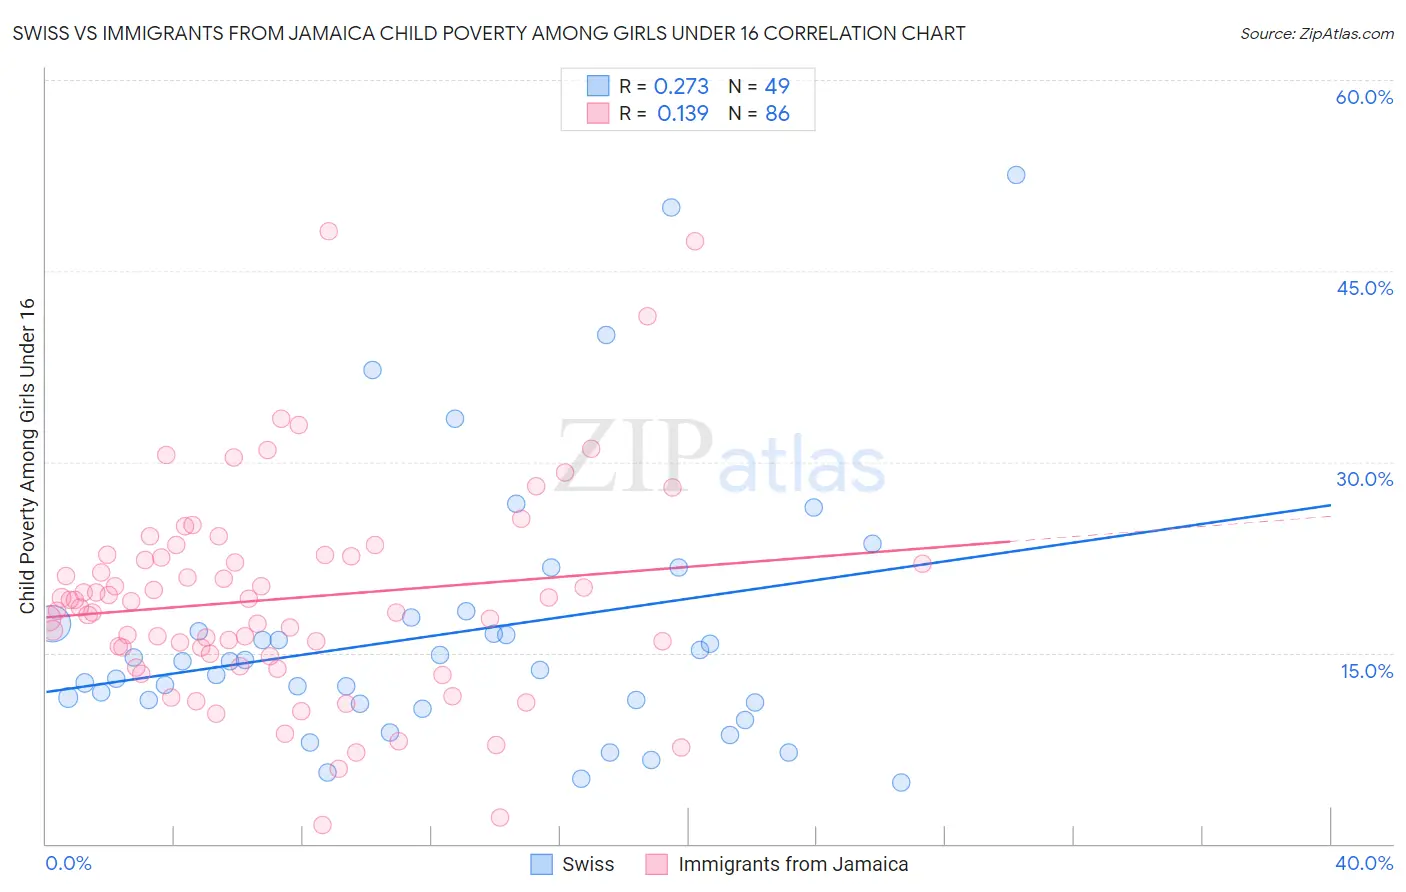 Swiss vs Immigrants from Jamaica Child Poverty Among Girls Under 16